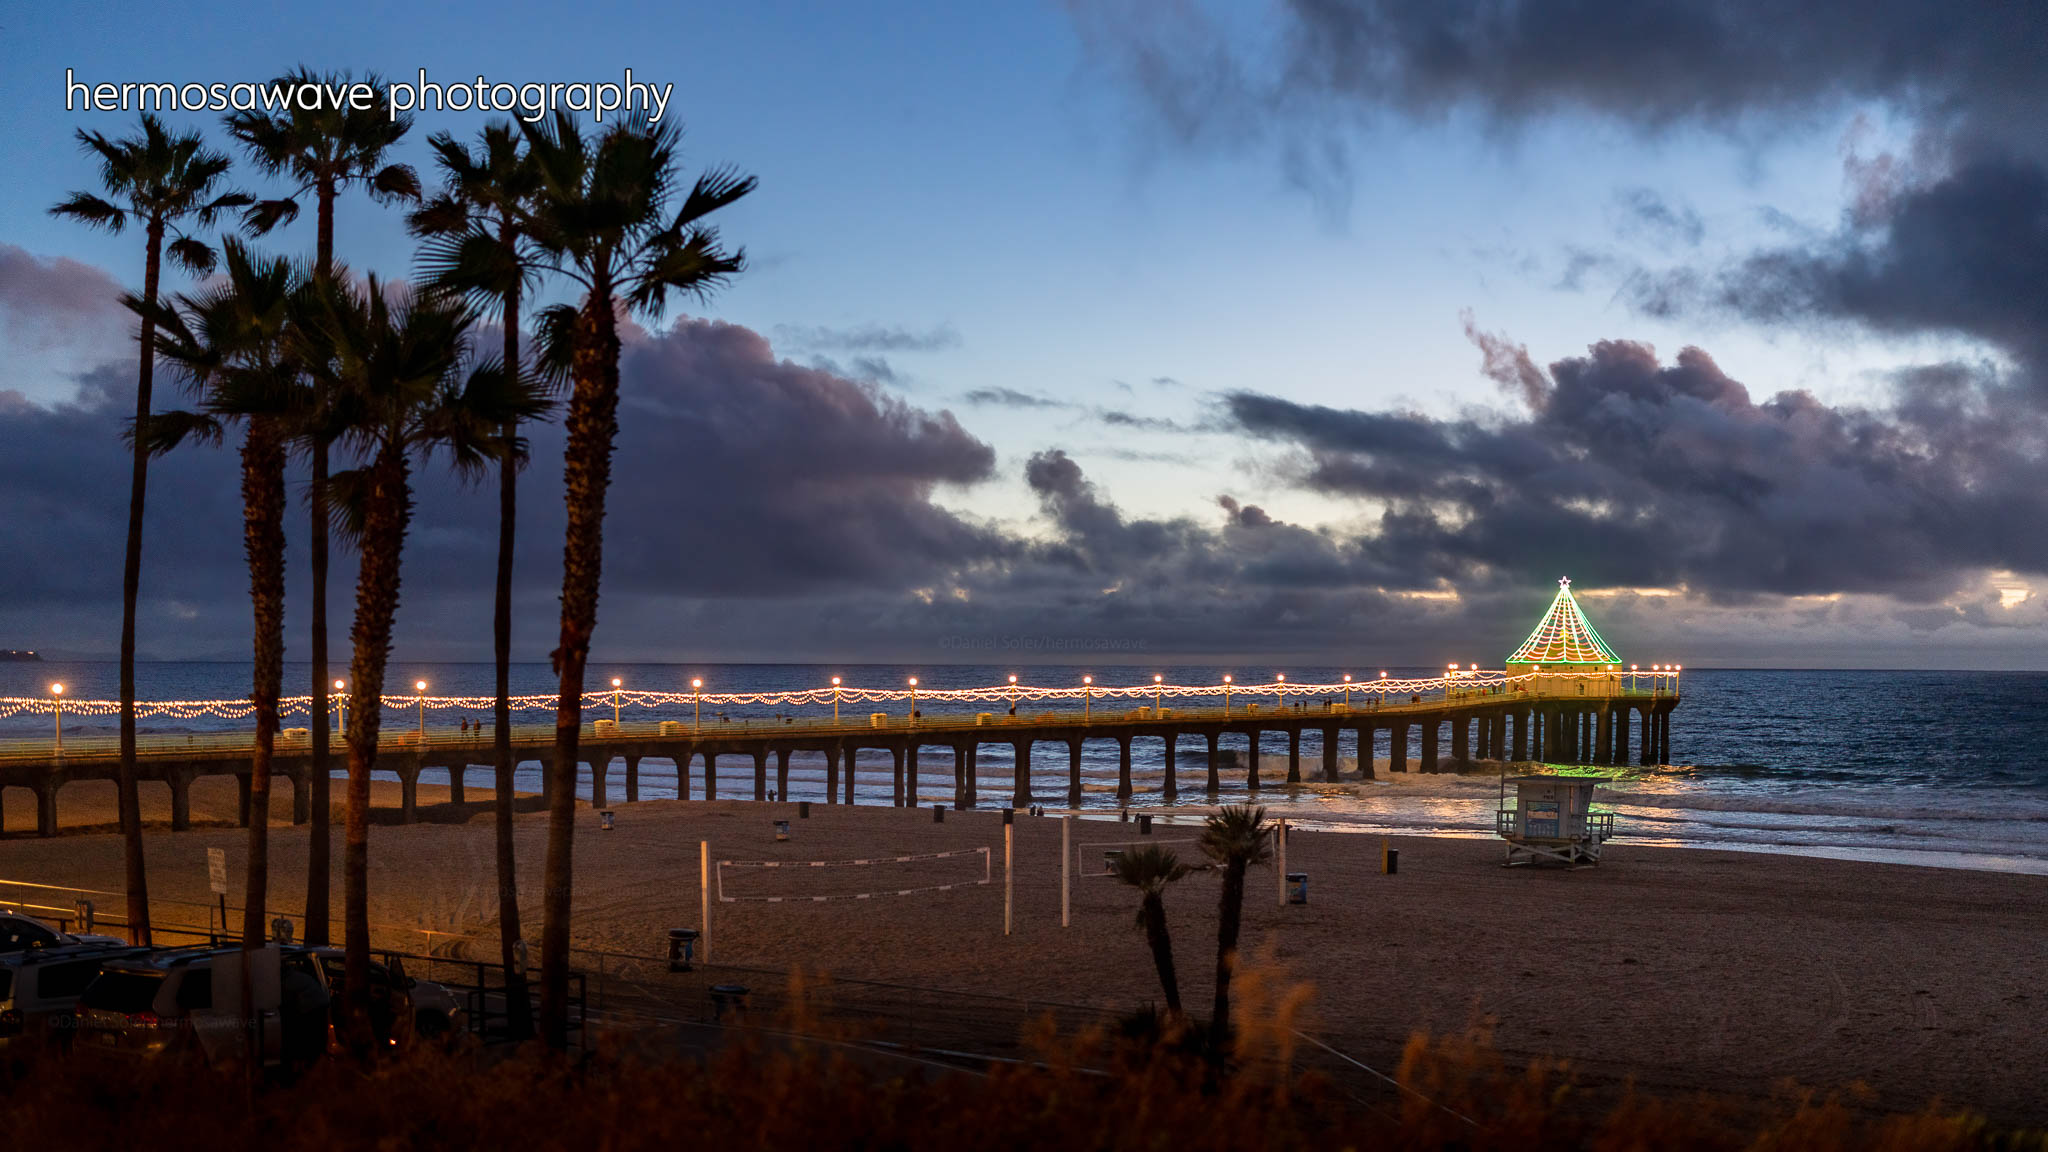 Christmas at the Pier